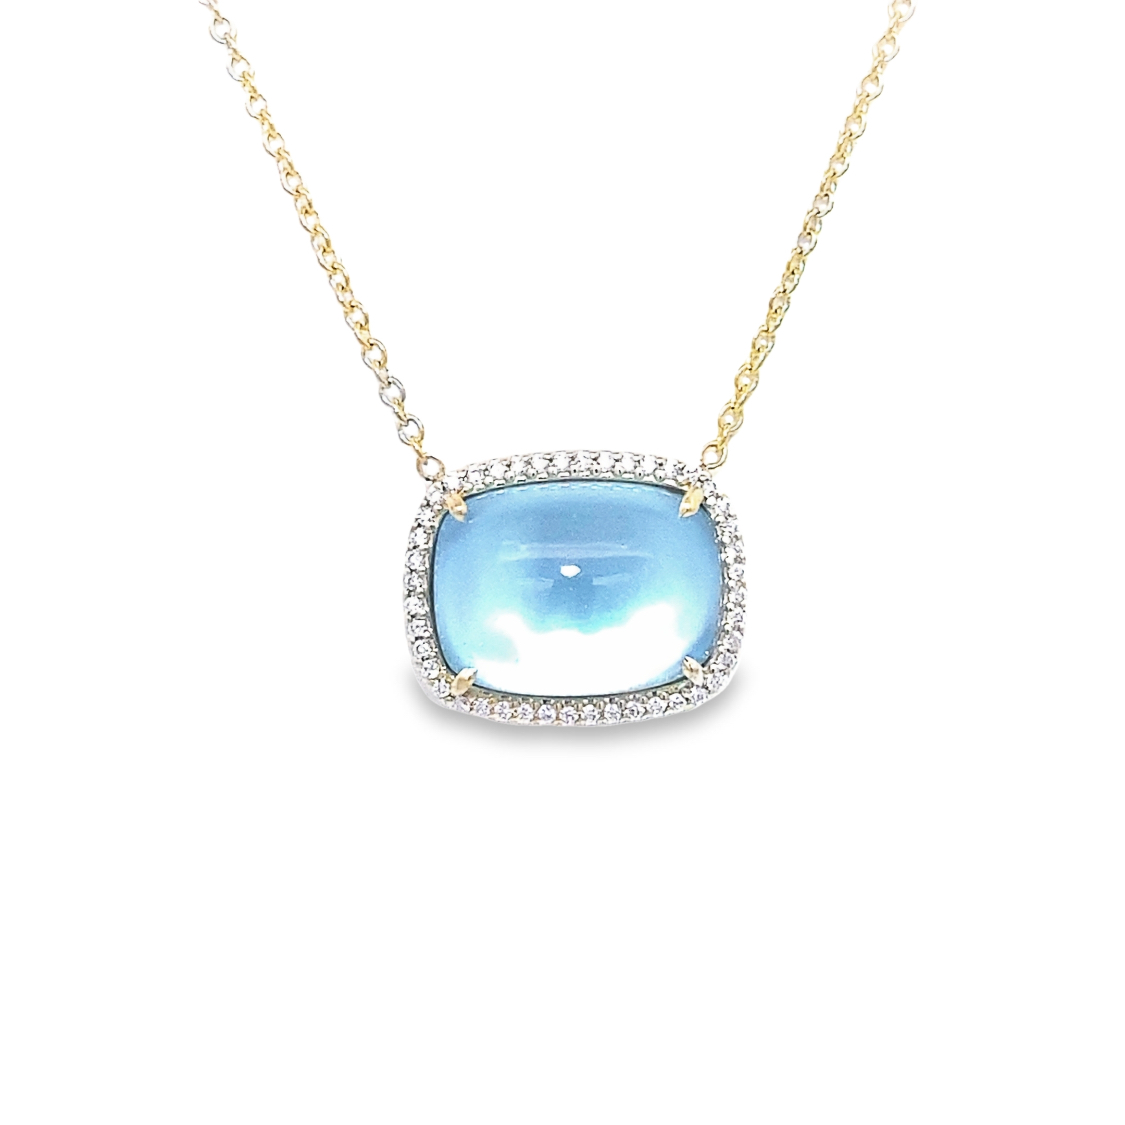 Mazza 14 Karat Yellow Gold Diamond  Blue Topaz  And Mother Of Pearl Necklace Measuring 16 Inches